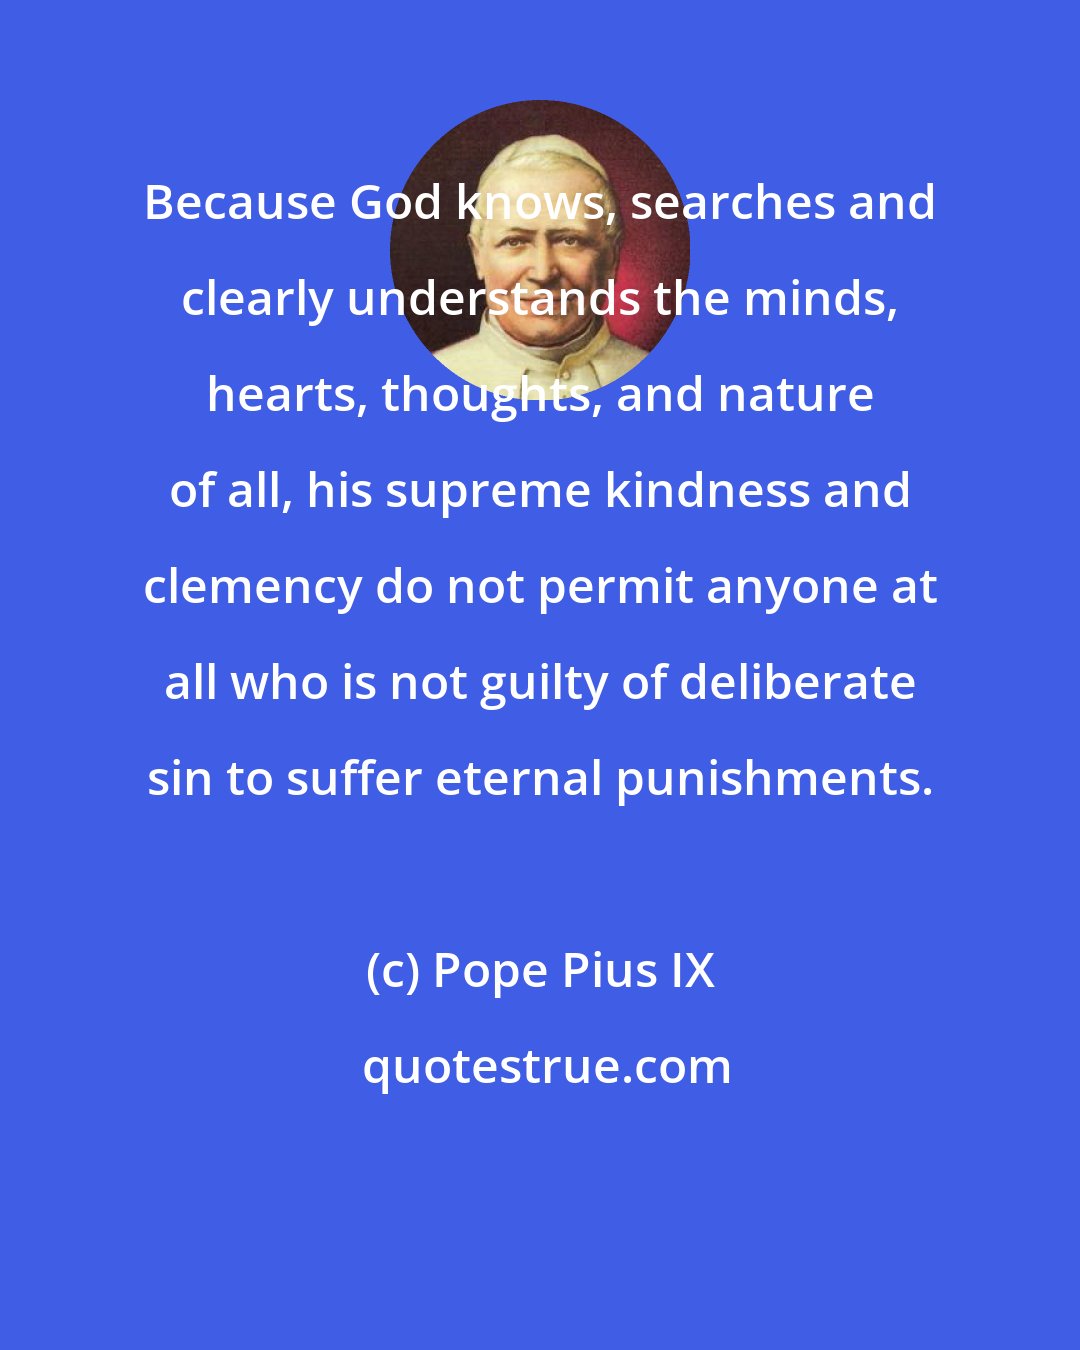 Pope Pius IX: Because God knows, searches and clearly understands the minds, hearts, thoughts, and nature of all, his supreme kindness and clemency do not permit anyone at all who is not guilty of deliberate sin to suffer eternal punishments.